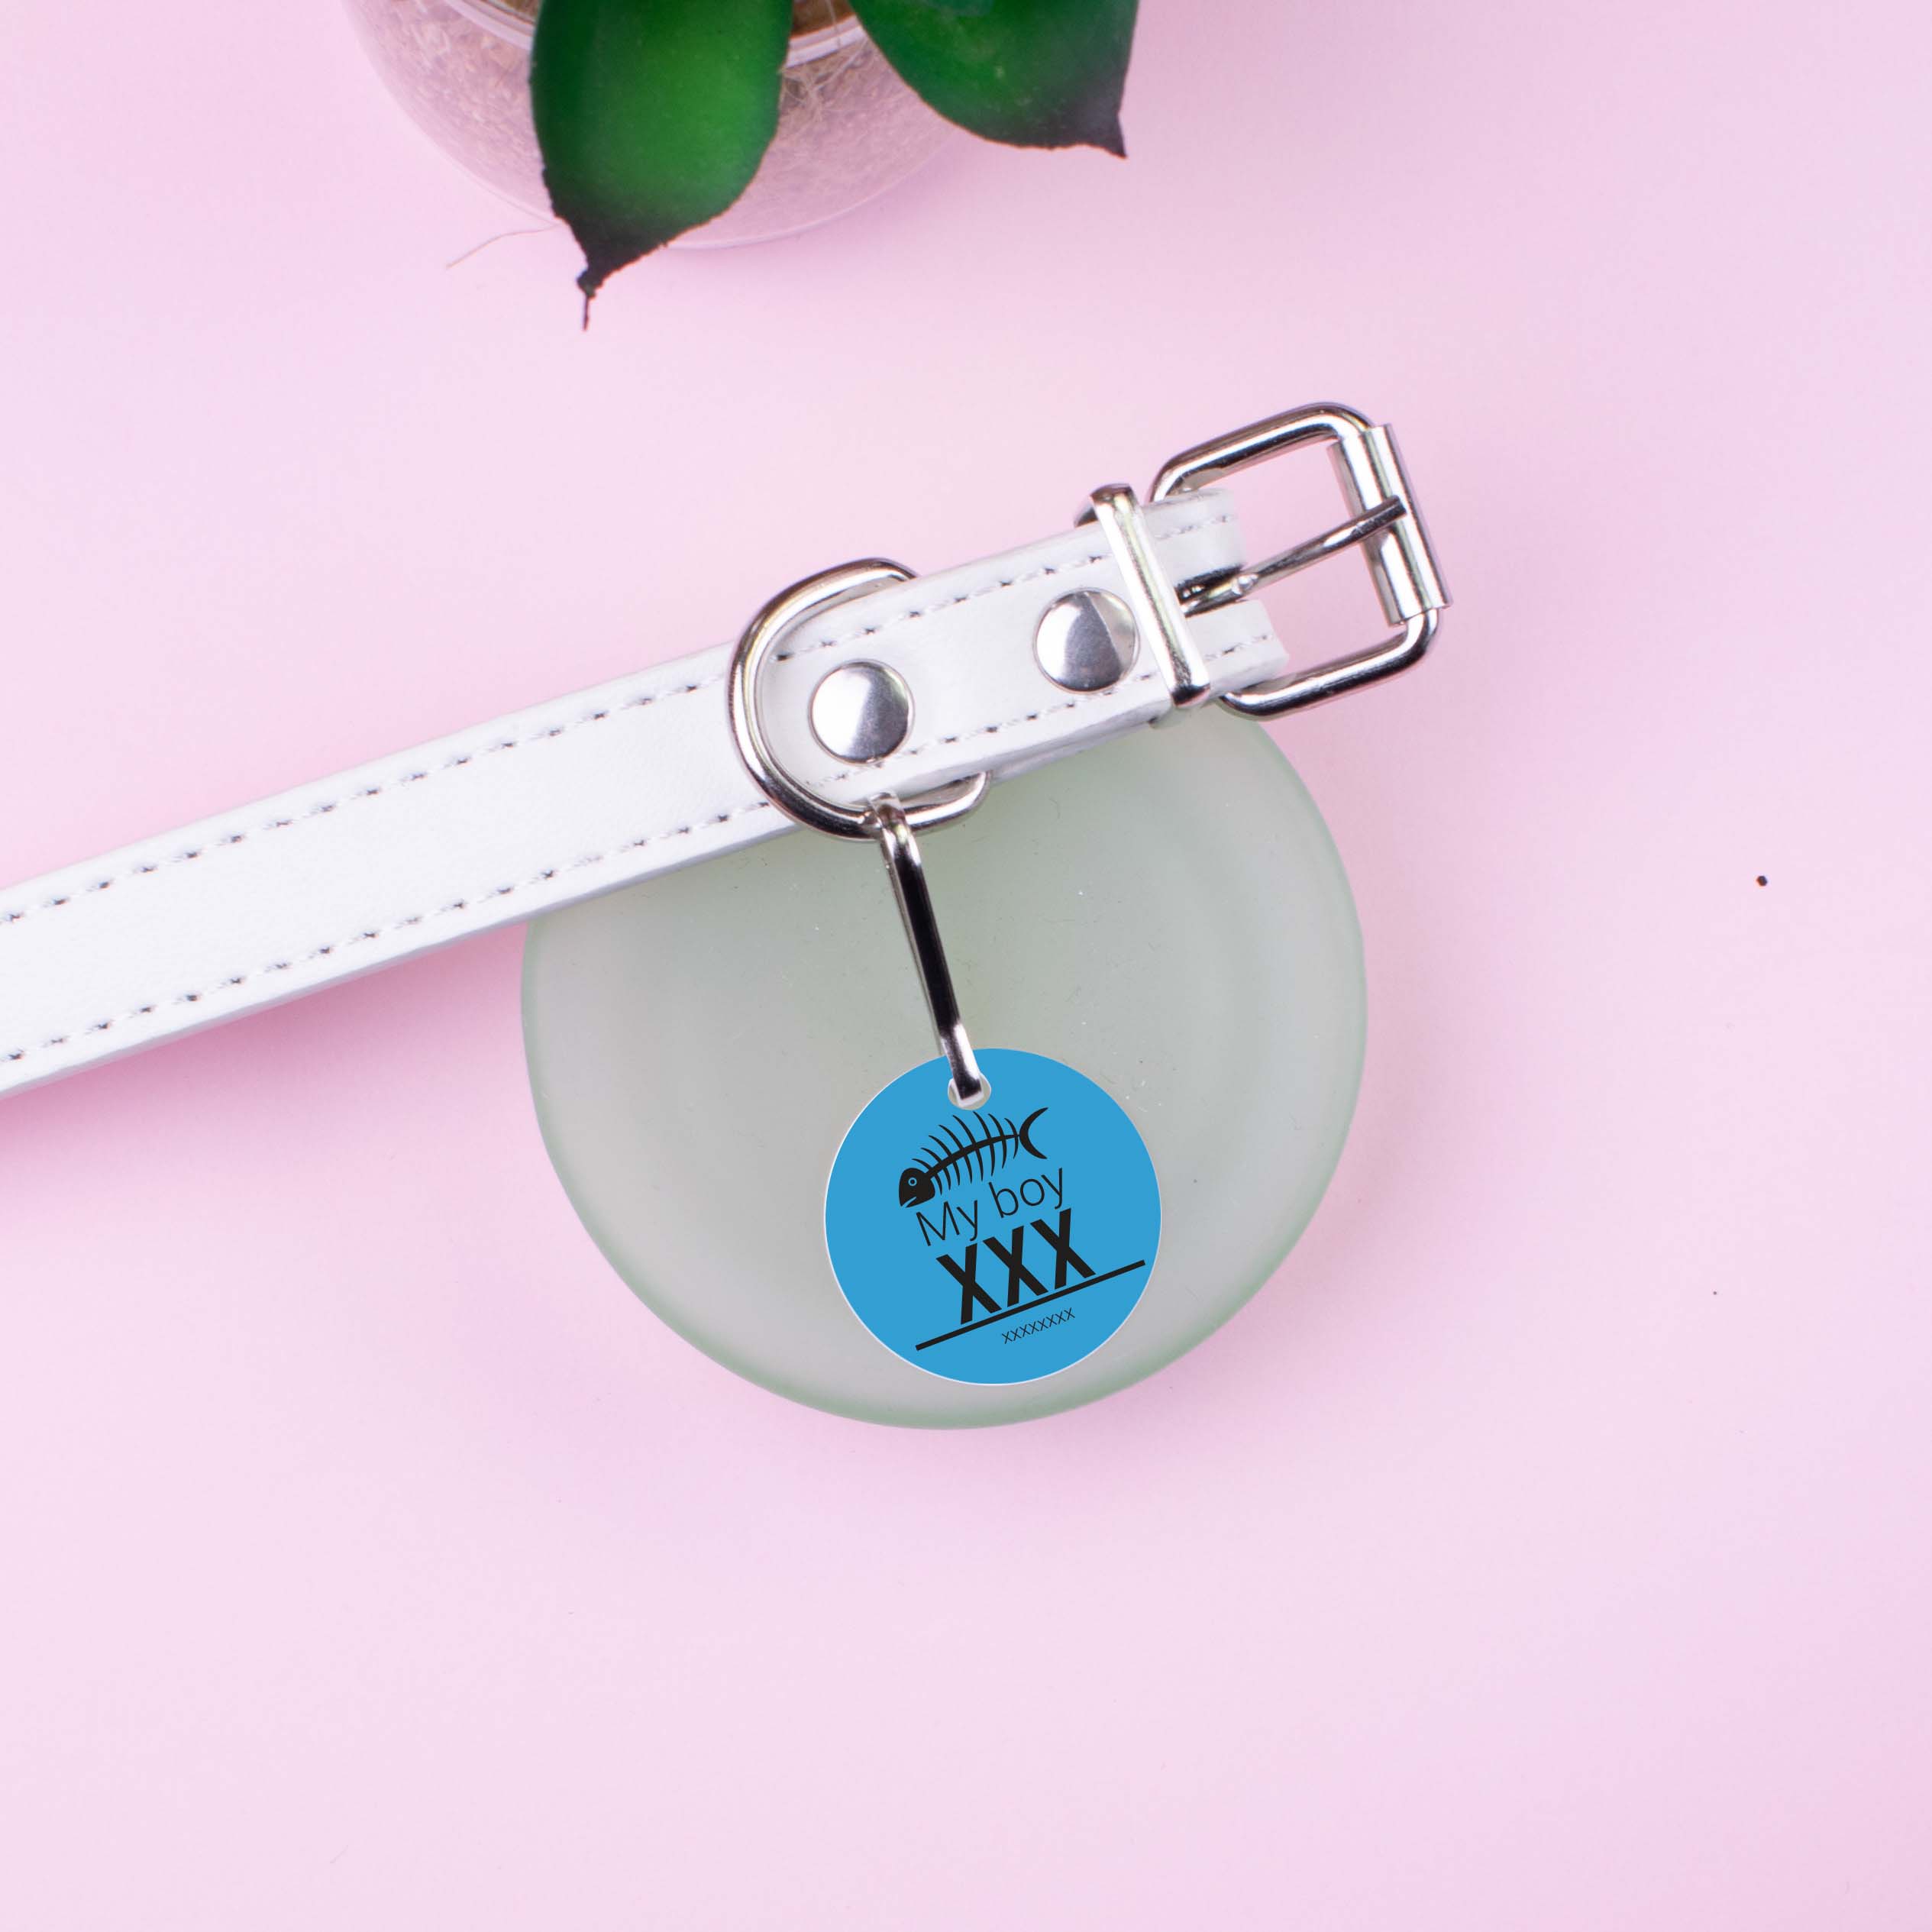 Personalised Pet Tag - Strong Blue